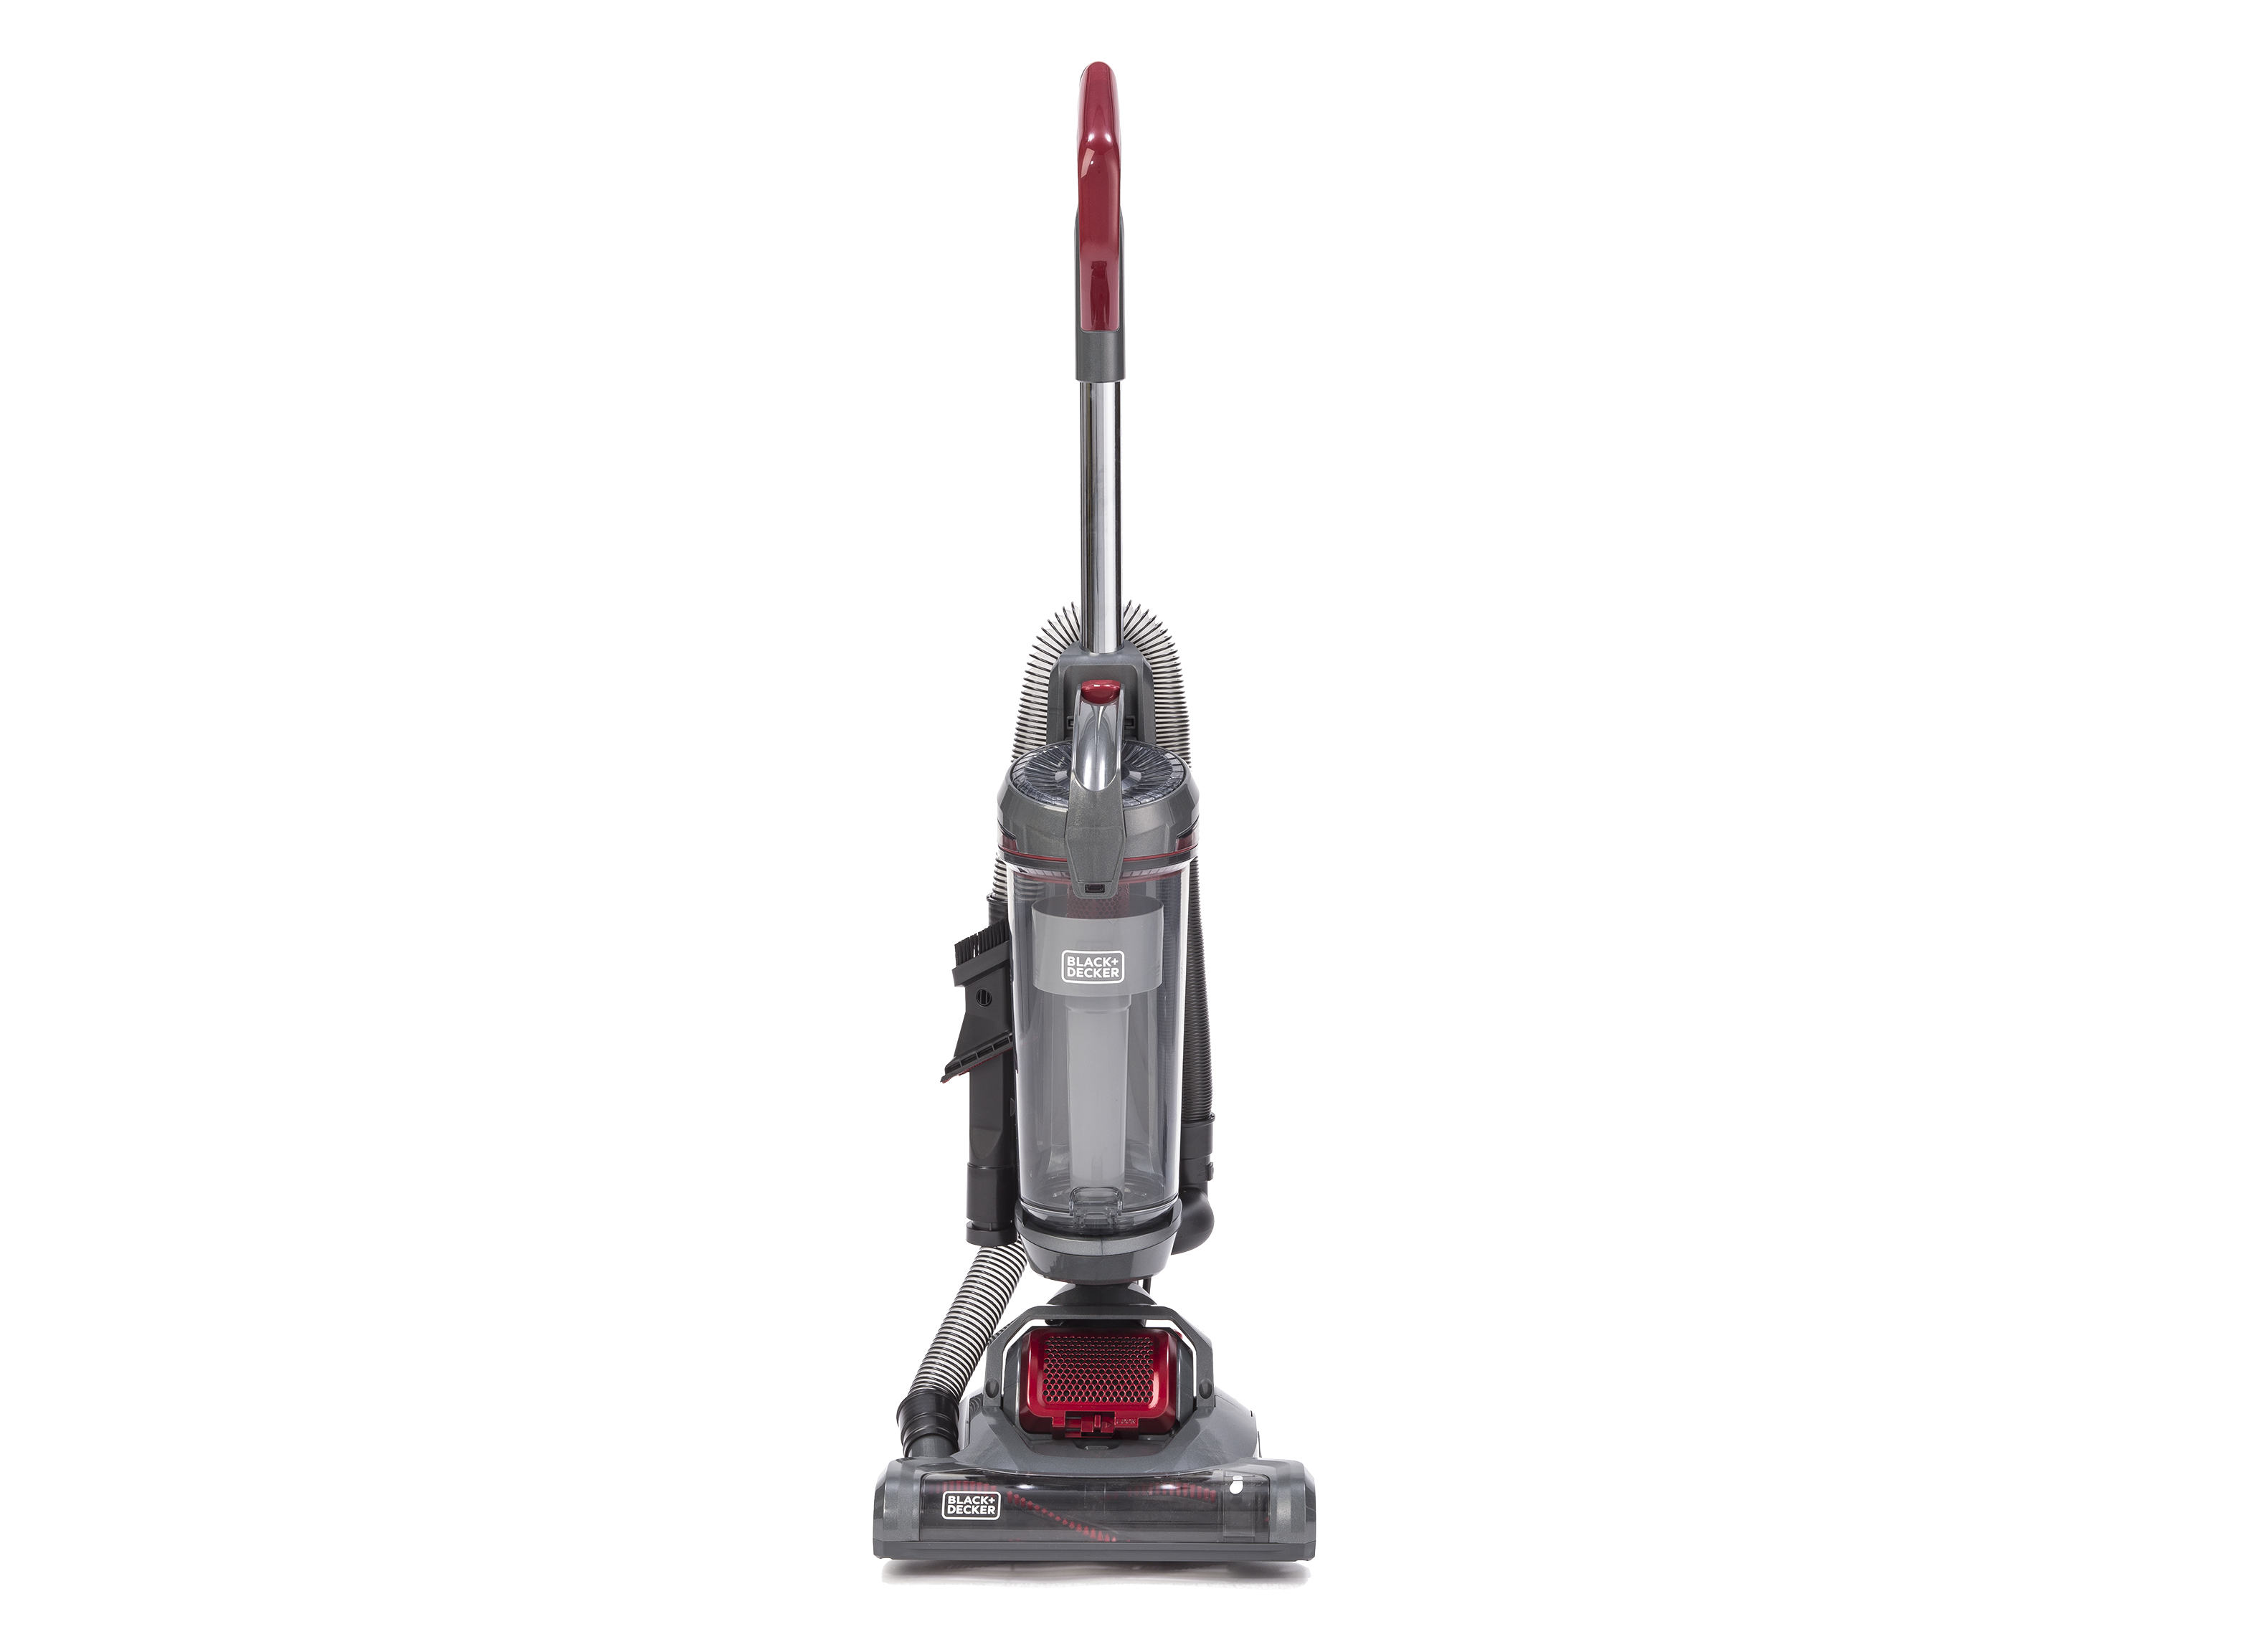 https://crdms.images.consumerreports.org/prod/products/cr/models/386386-uprightvacuumcleaners-blackdecker-airswivelbdasv102.png